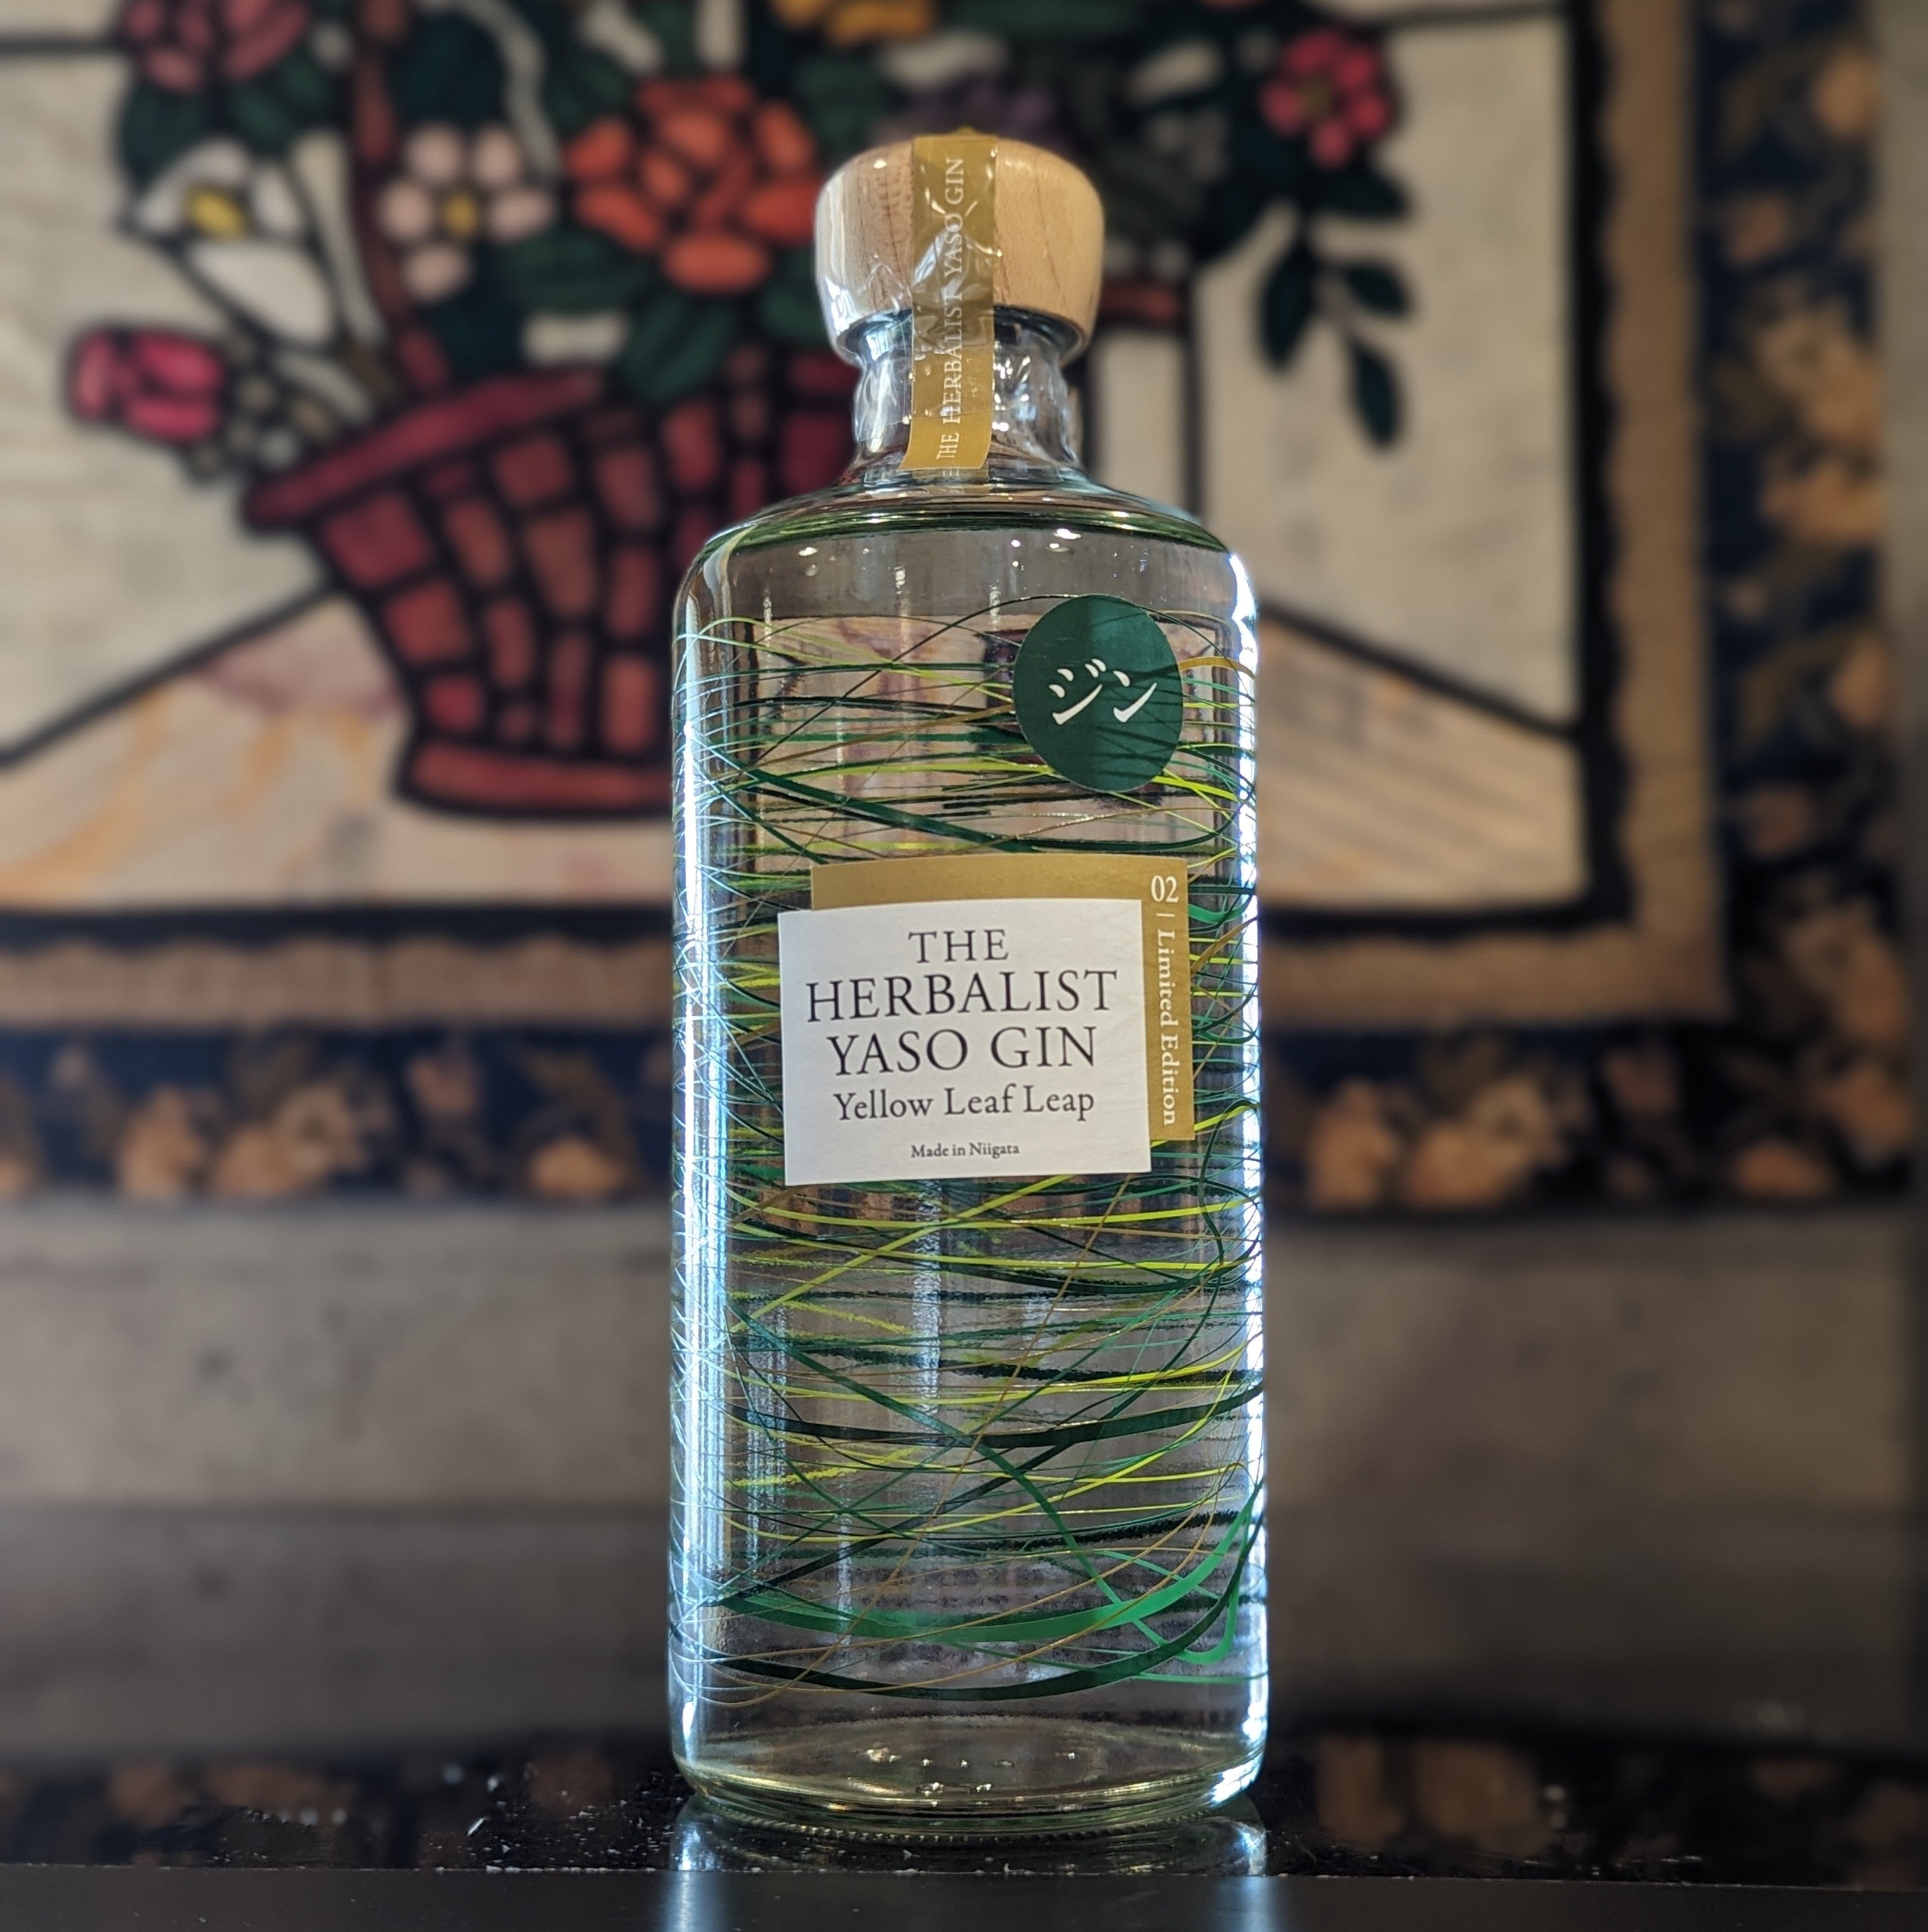 THE HERBALIST YASO GIN Limited Edition 02 Yellow Leaf Leap